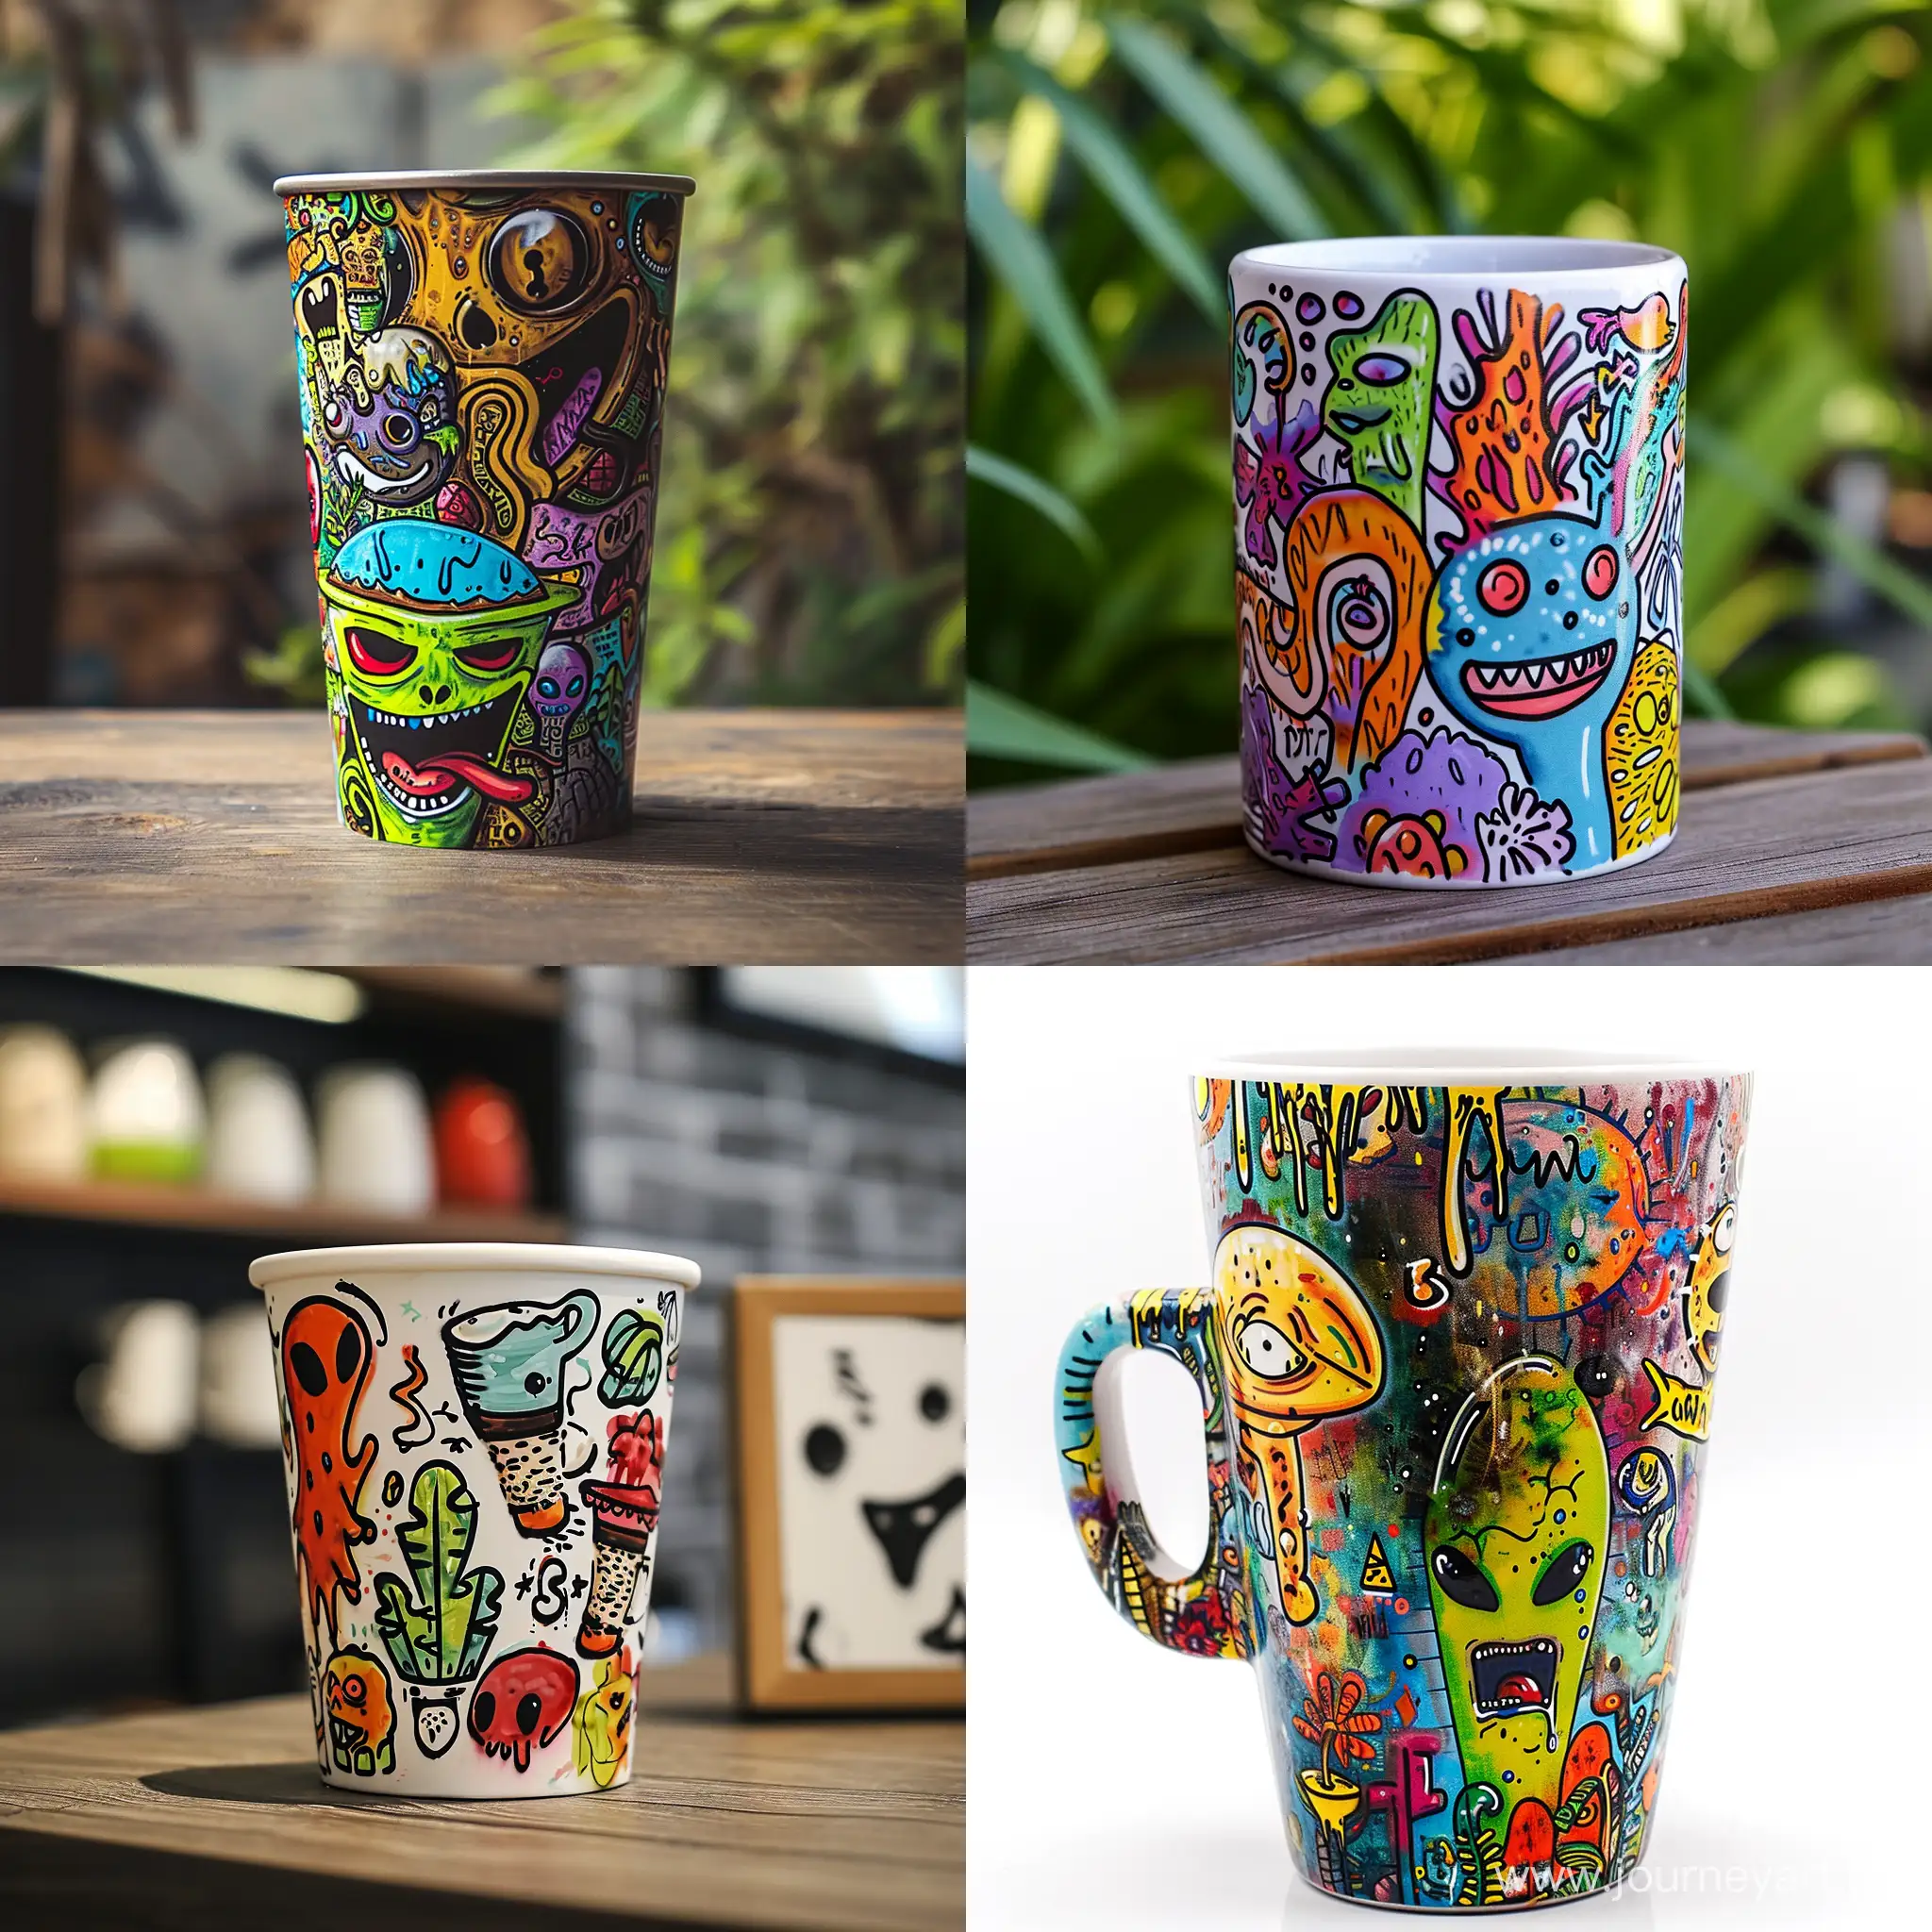 500 ml coffee cup with graffiti on the theme of coffee, plants, aliens